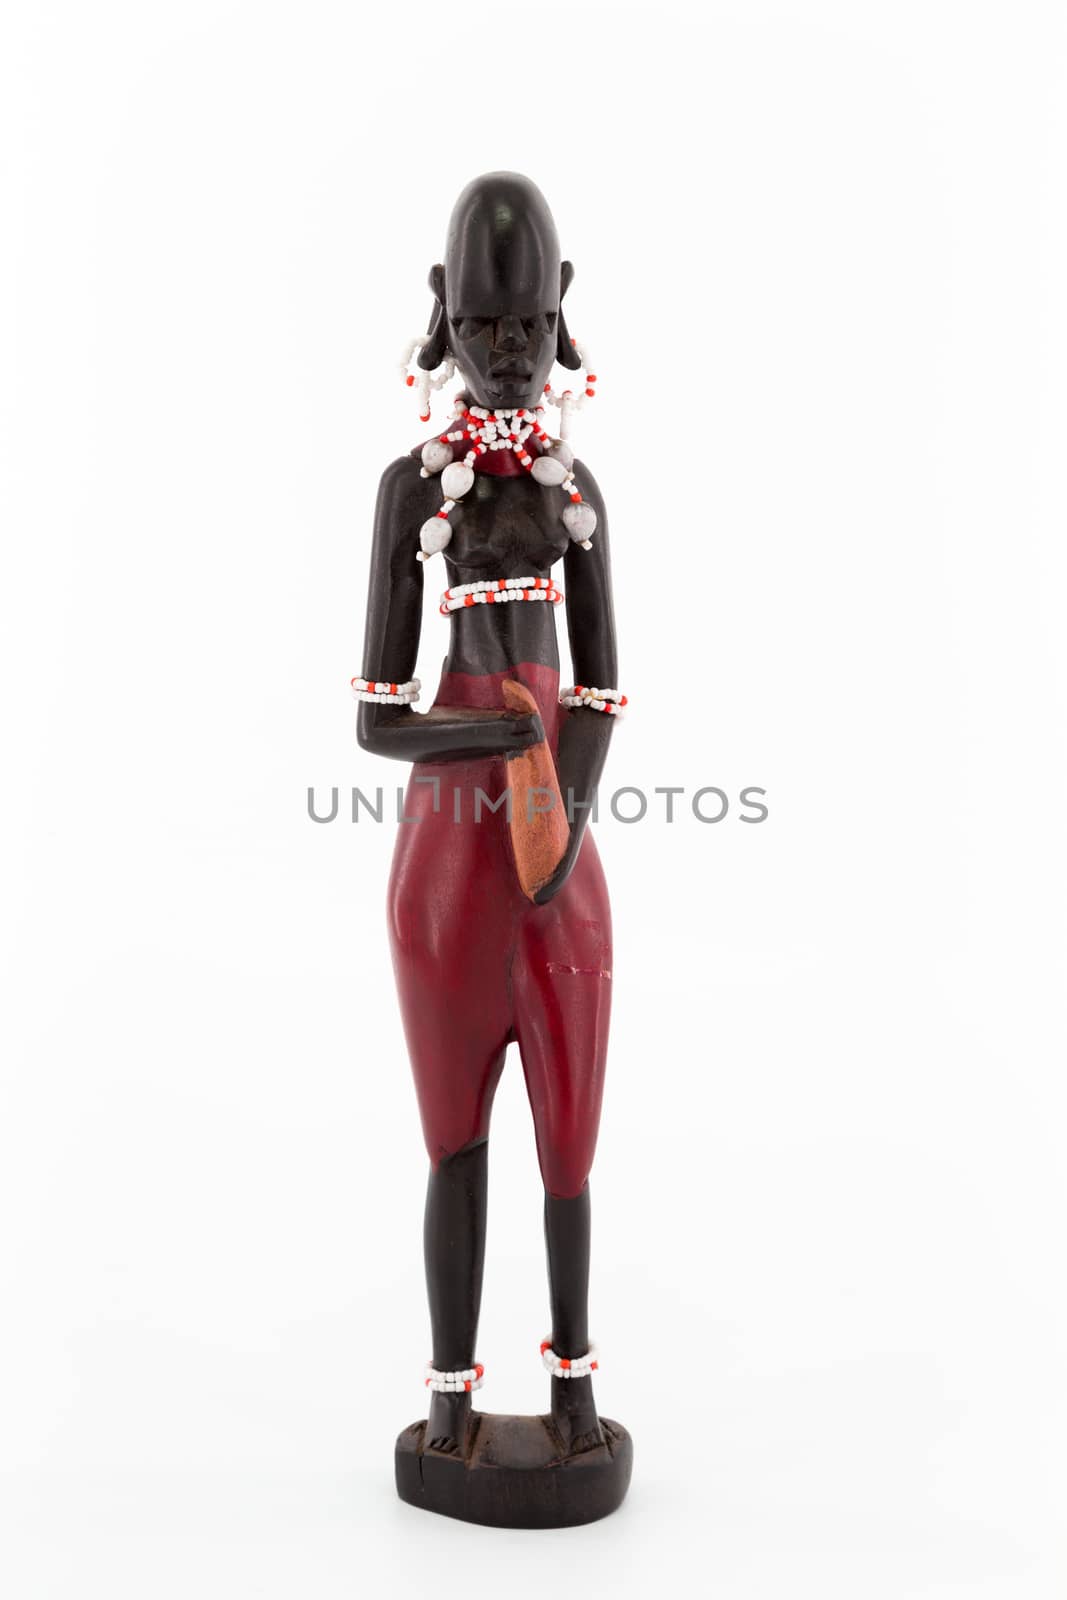 A wooden figure of a Maasai women on white background